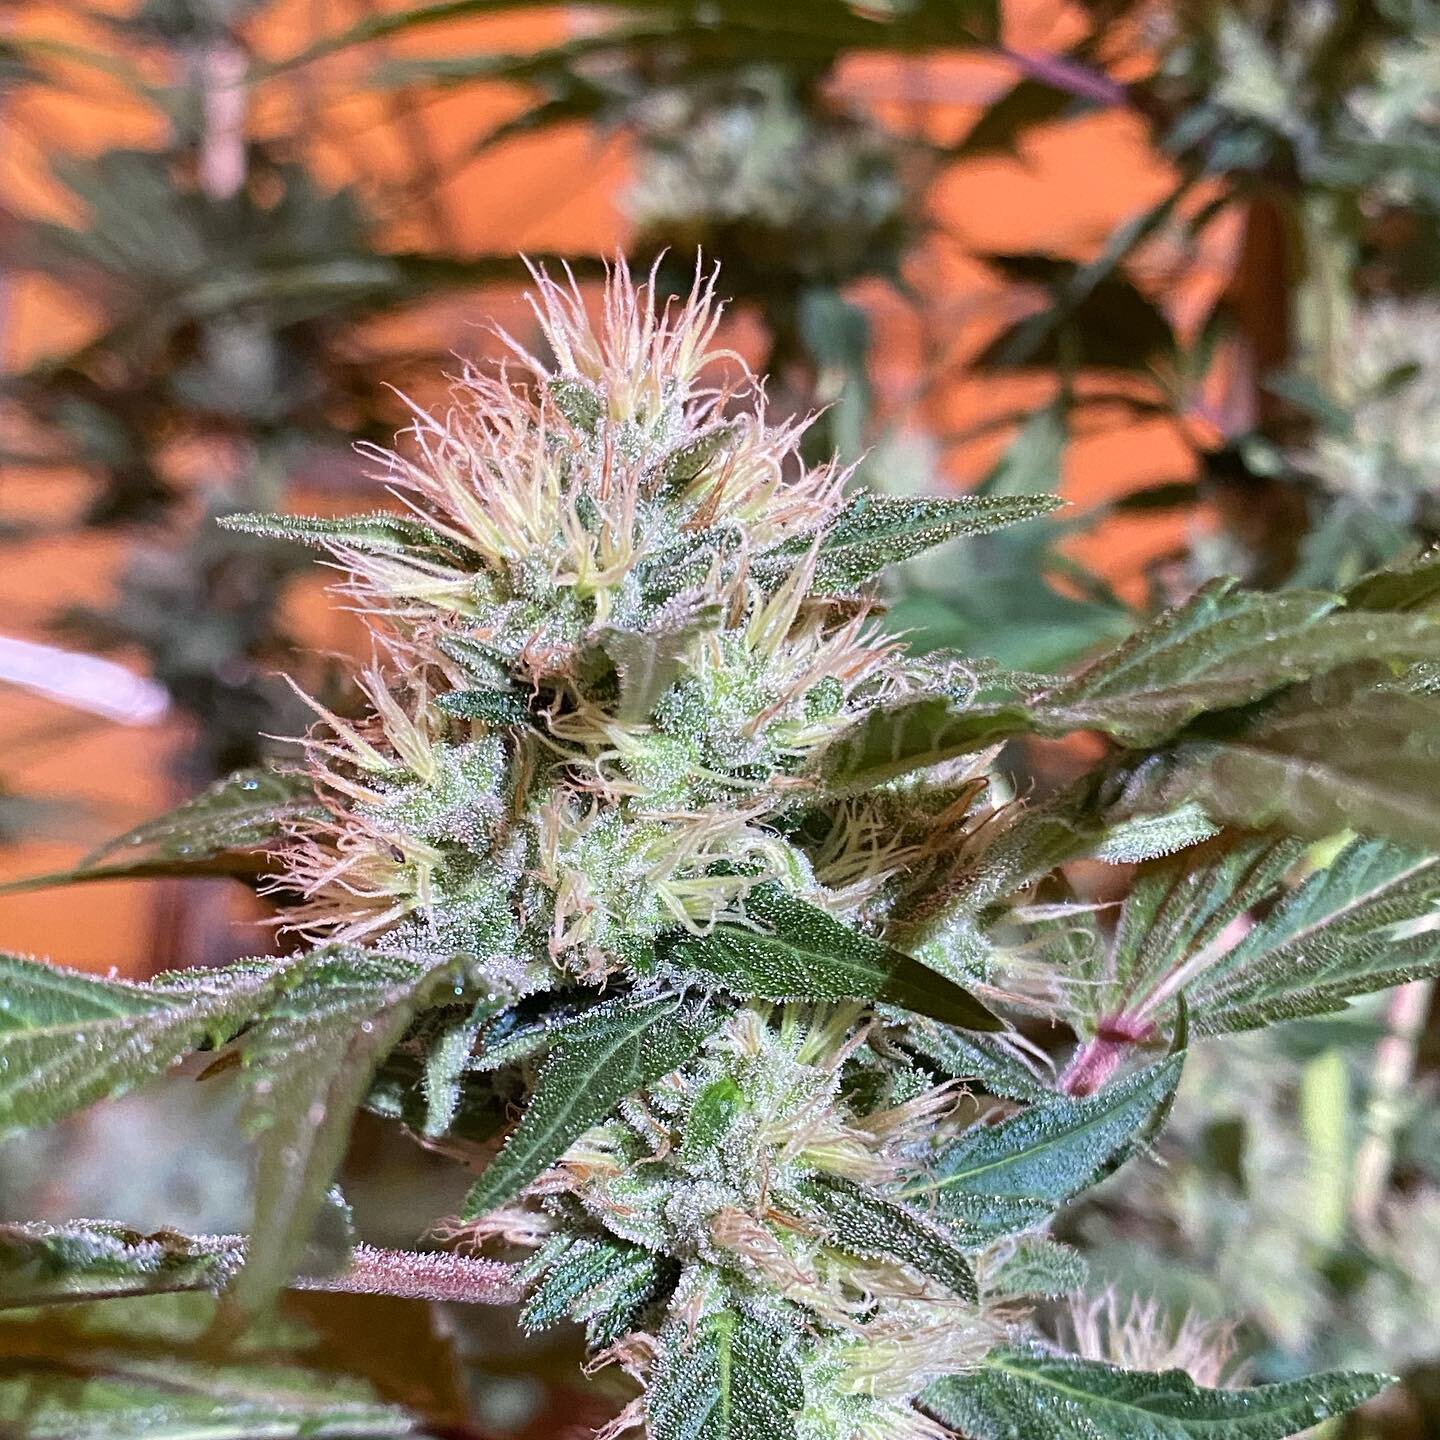 Cherry Abacus&trade;️ looking pretty👌 pretty nice and ready to harvest. 
🍒❄️🌿❄️🍒 Find it in our finished product line @dieselhemp along with our other proprietary cultivars ⛽️ in flower, pre rolls and concentrate form. Bred and produced in-house.